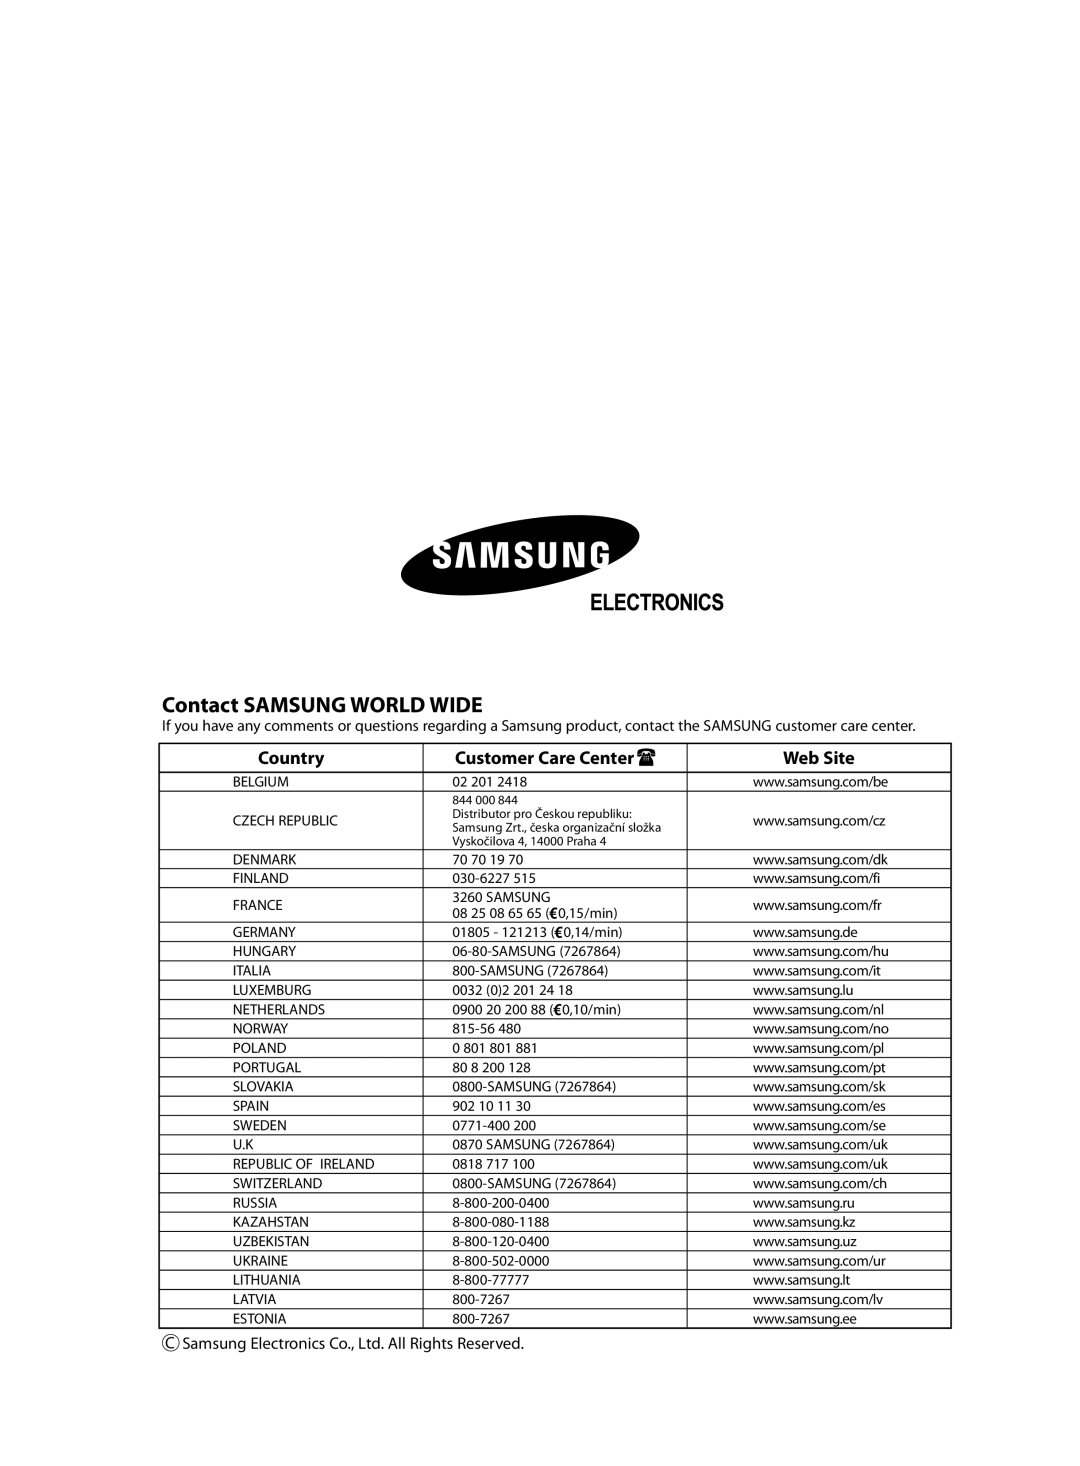 Samsung MH020FPEA, MH052FPEA1, MH026FPEA, MH035FPEA Contact SAMSUNG WORLD WIDE, Country, Customer Care Center, Web Site 